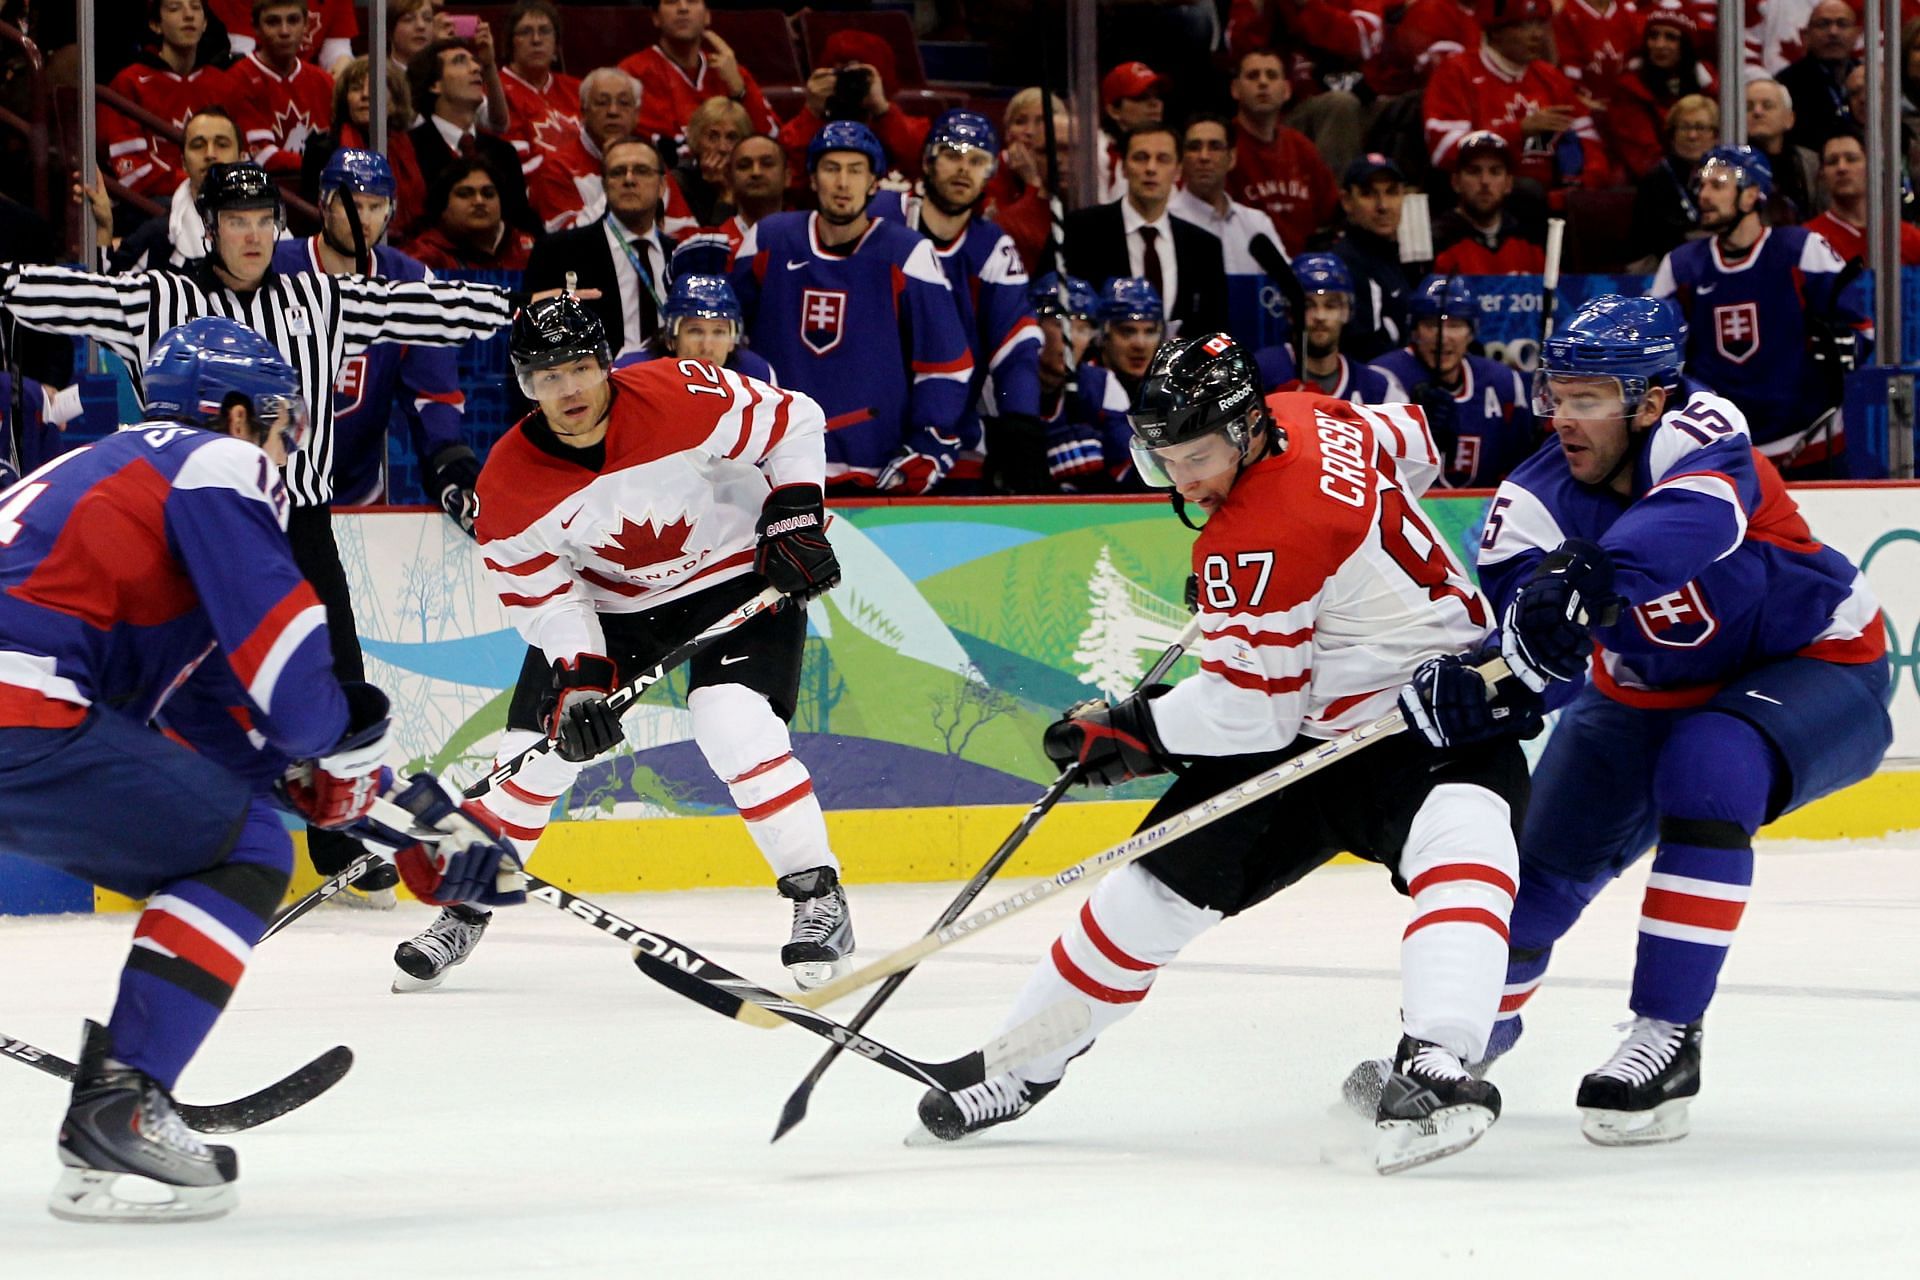 Slovakia vs Canada Group B How to watch, live streaming, channel list and more